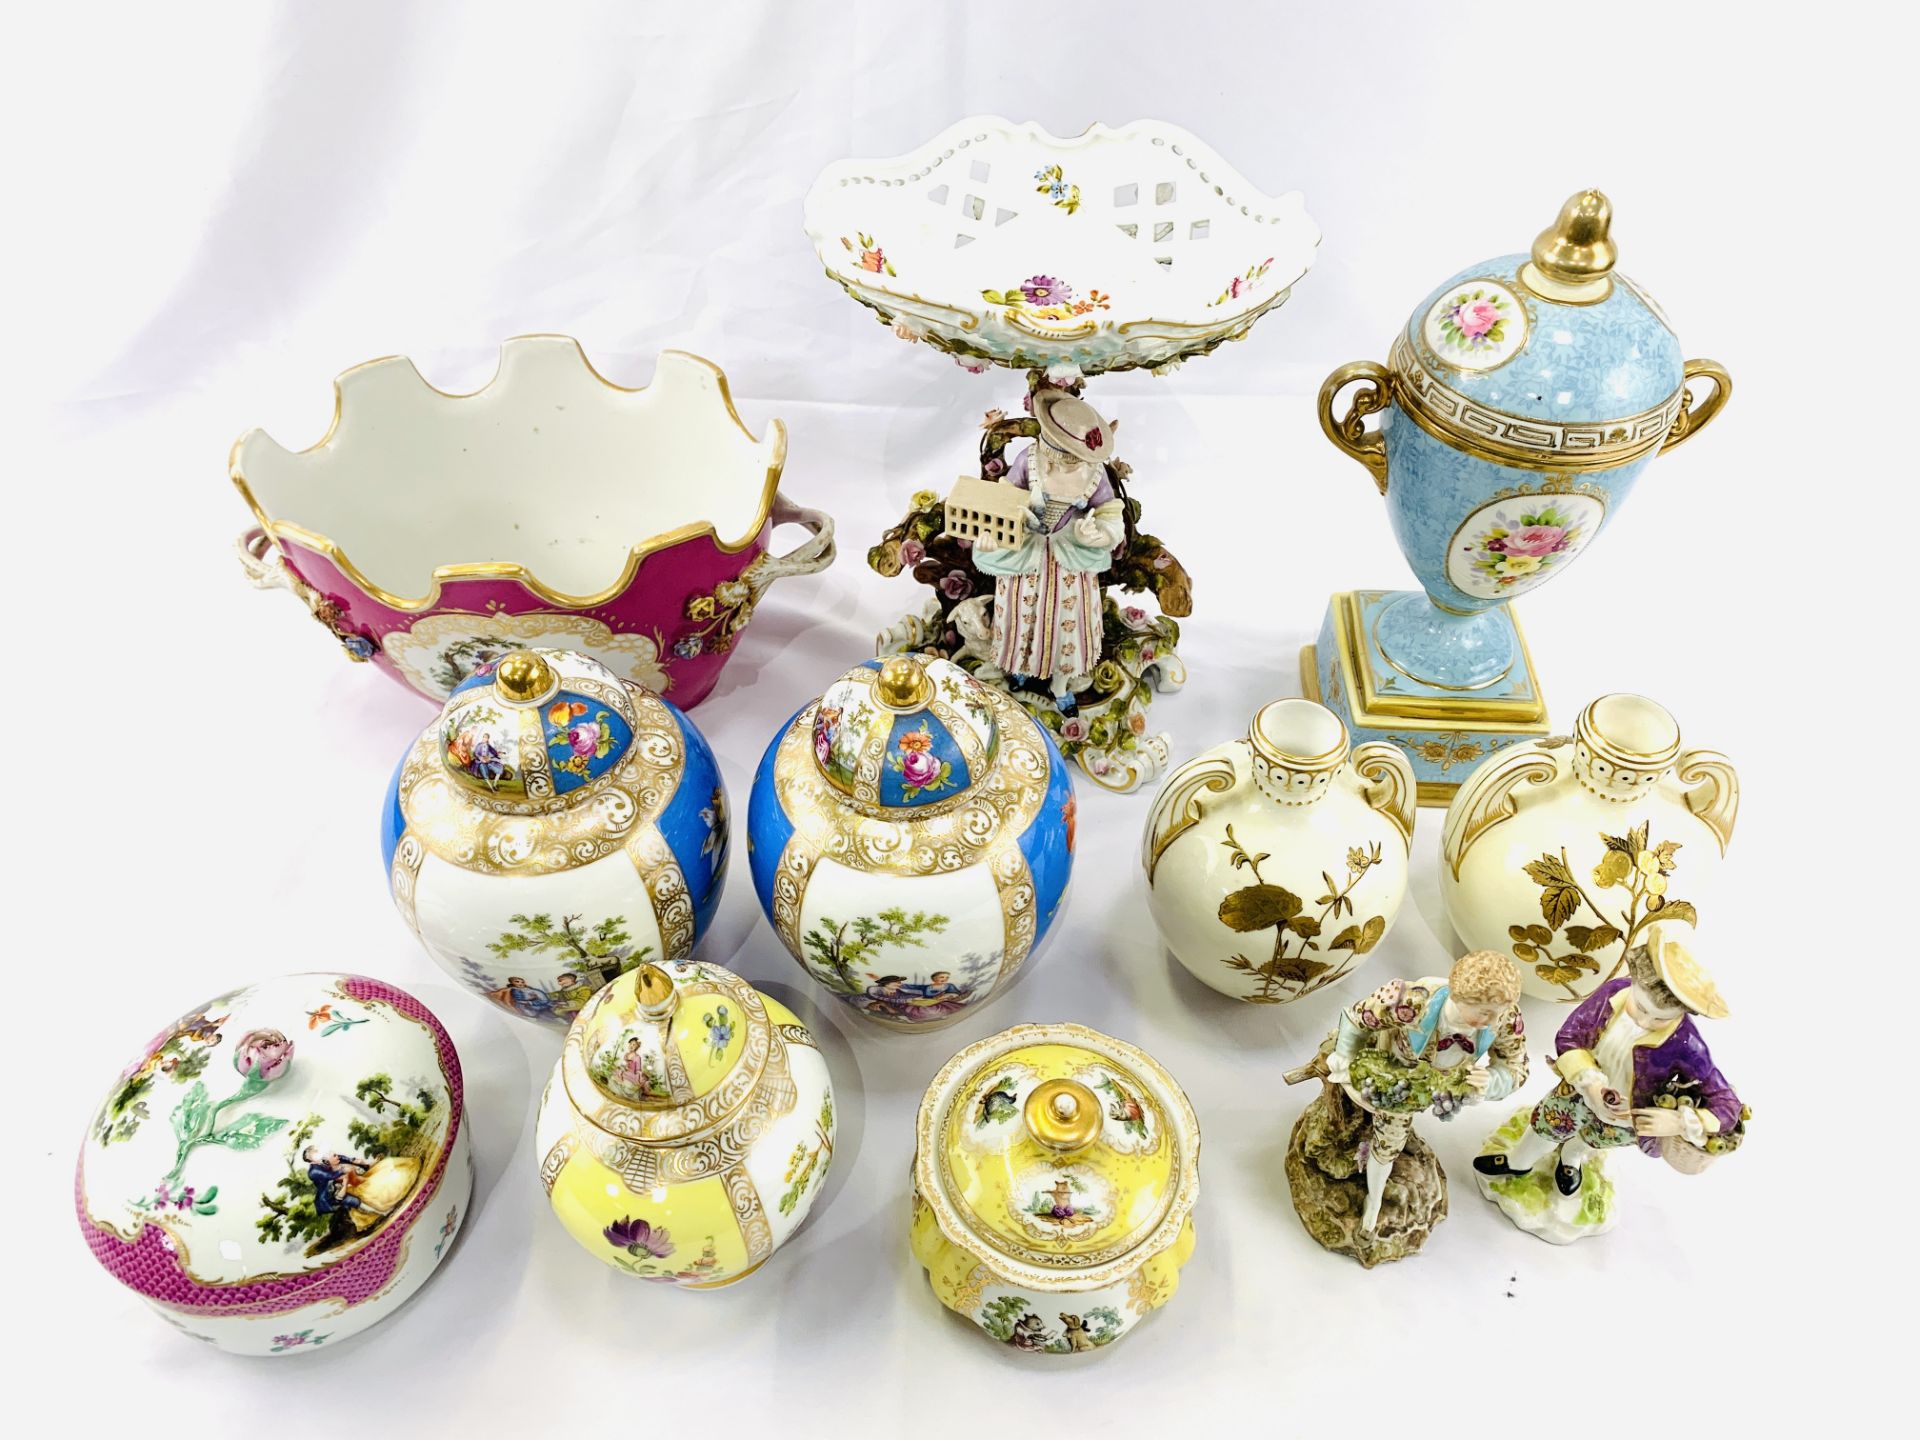 Collection of Dresden and Meissen porcelain - Image 4 of 9